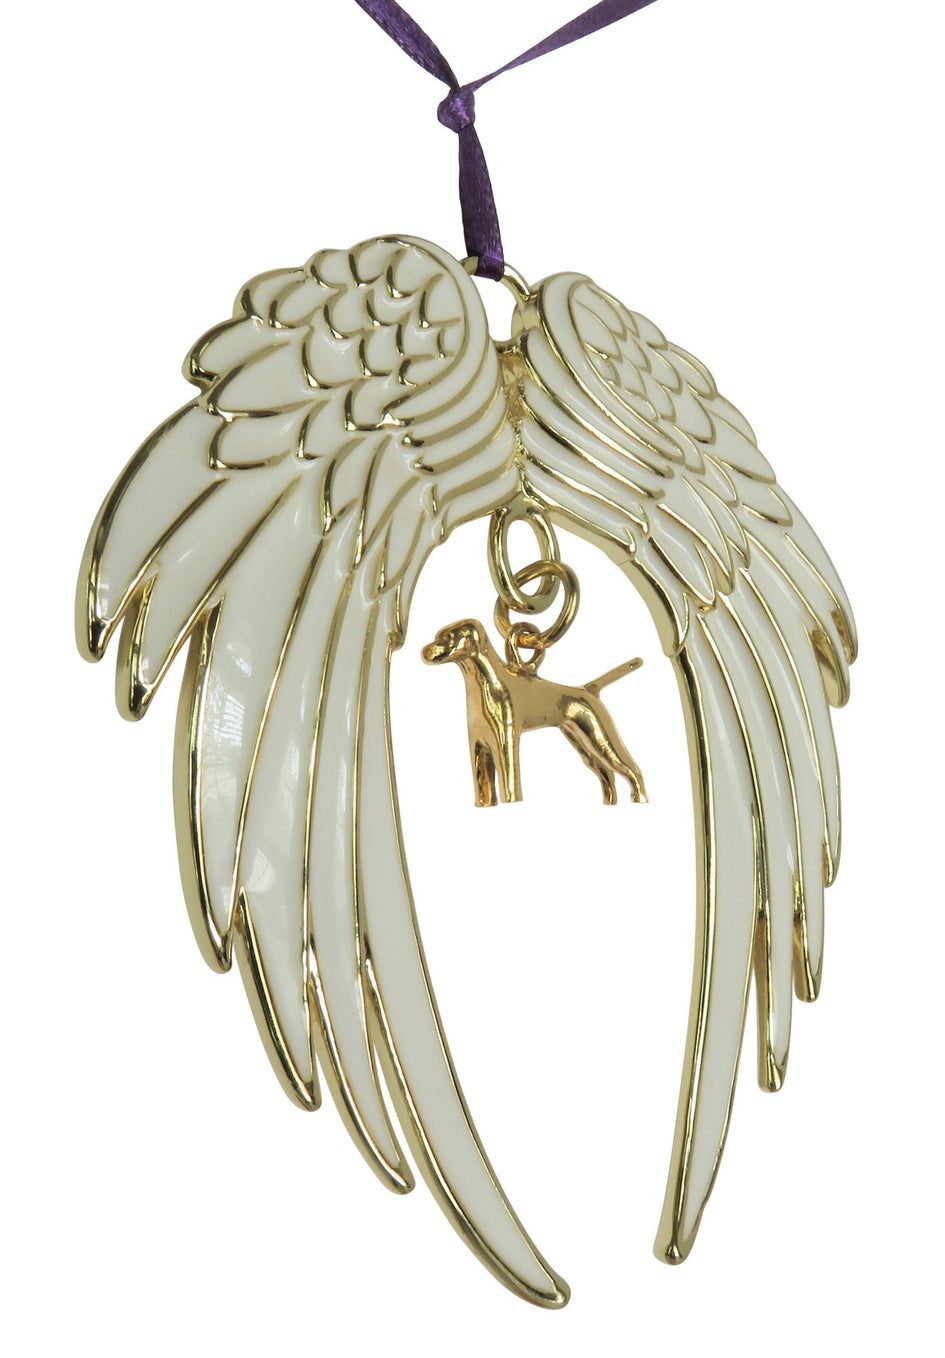 Vizsla Gold Plated Holiday Angel Wing Ornament